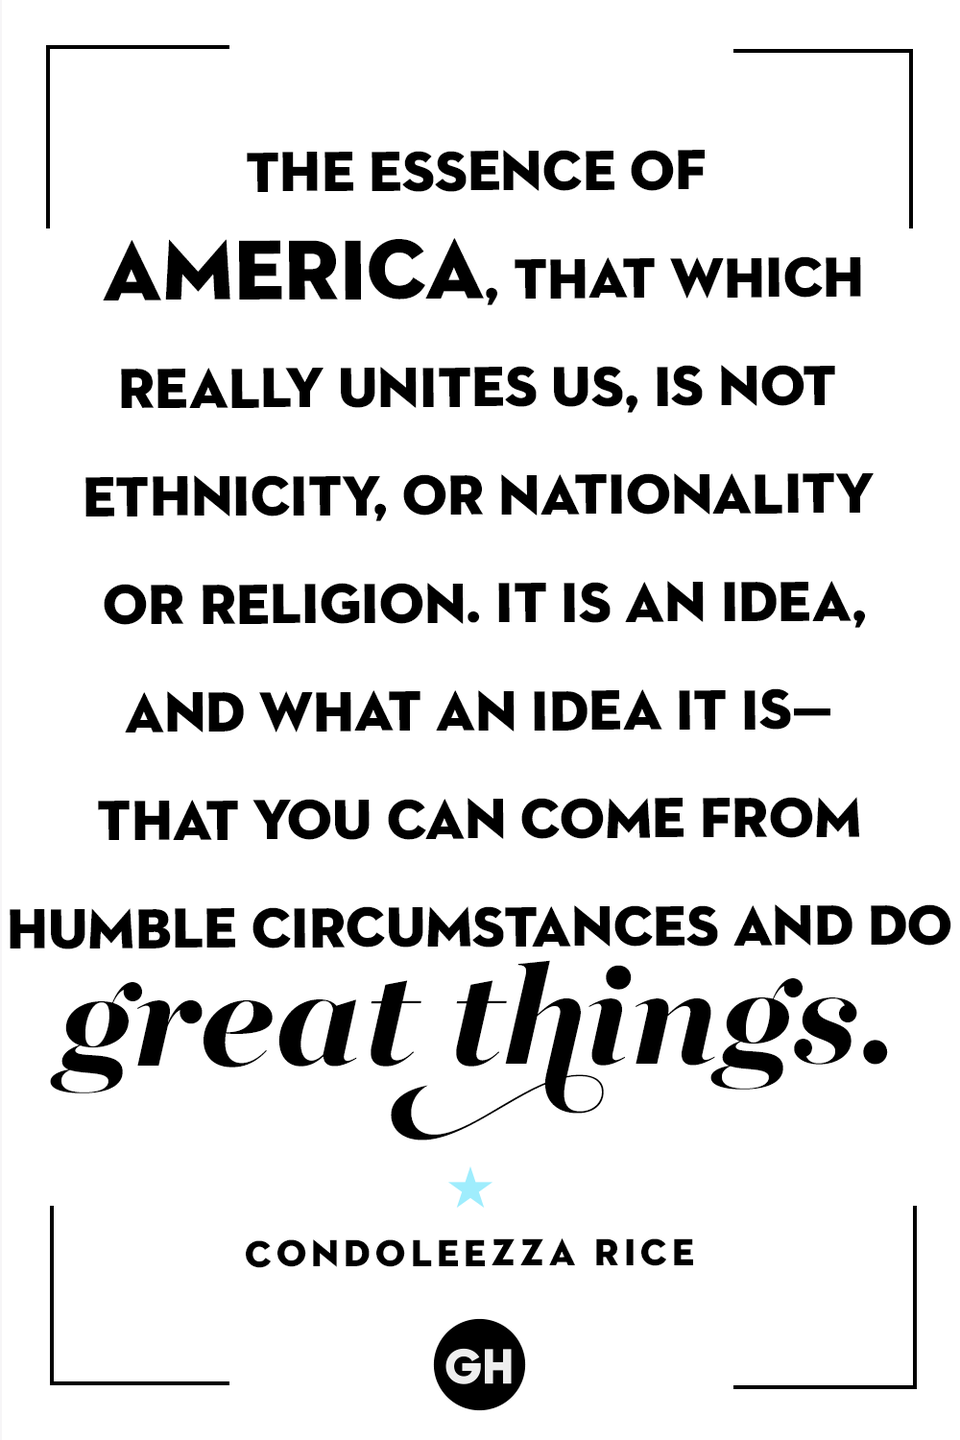 <p>The essence of America, that which really unites us, is not ethnicity or nationality or religion. It is an idea, and what an idea it is — that you can come from humble circumstances and do great things.</p>